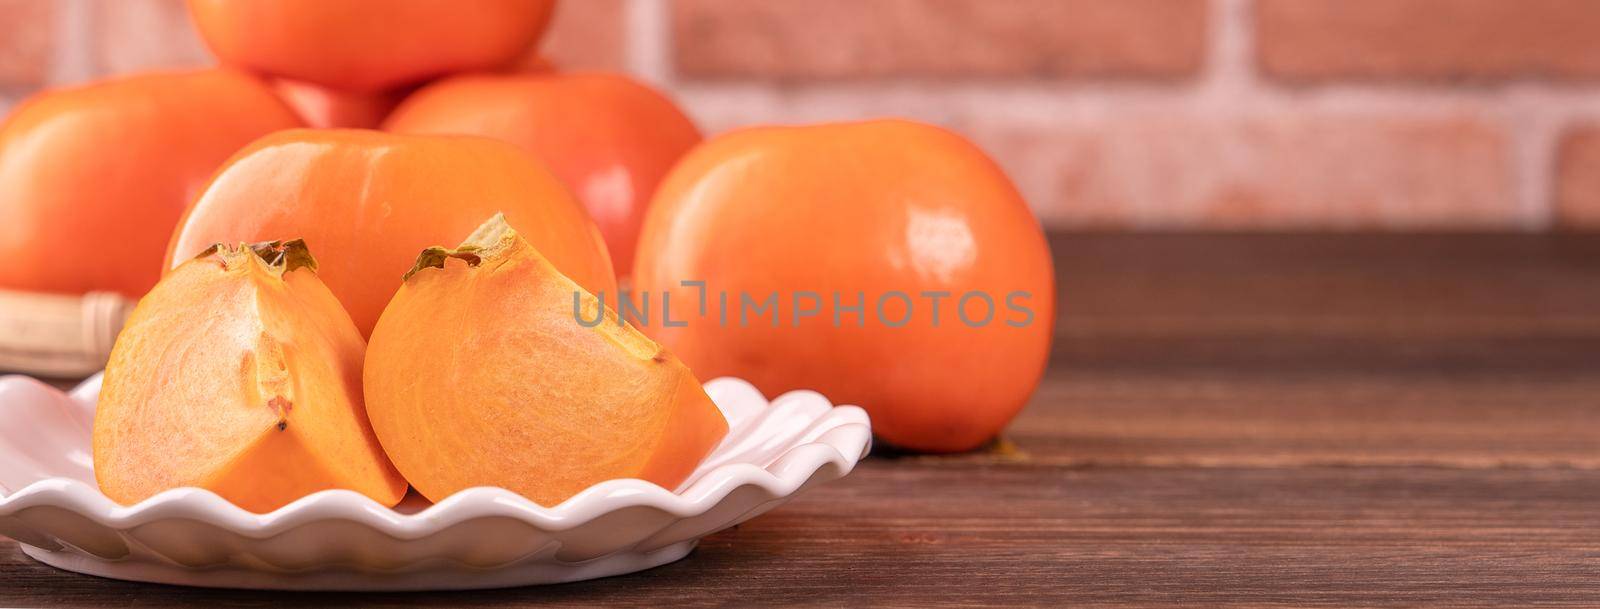 Fresh beautiful sliced sweet persimmon kaki on dark wooden table with red brick wall background, Chinese lunar new year fruit design concept, close up. by ROMIXIMAGE